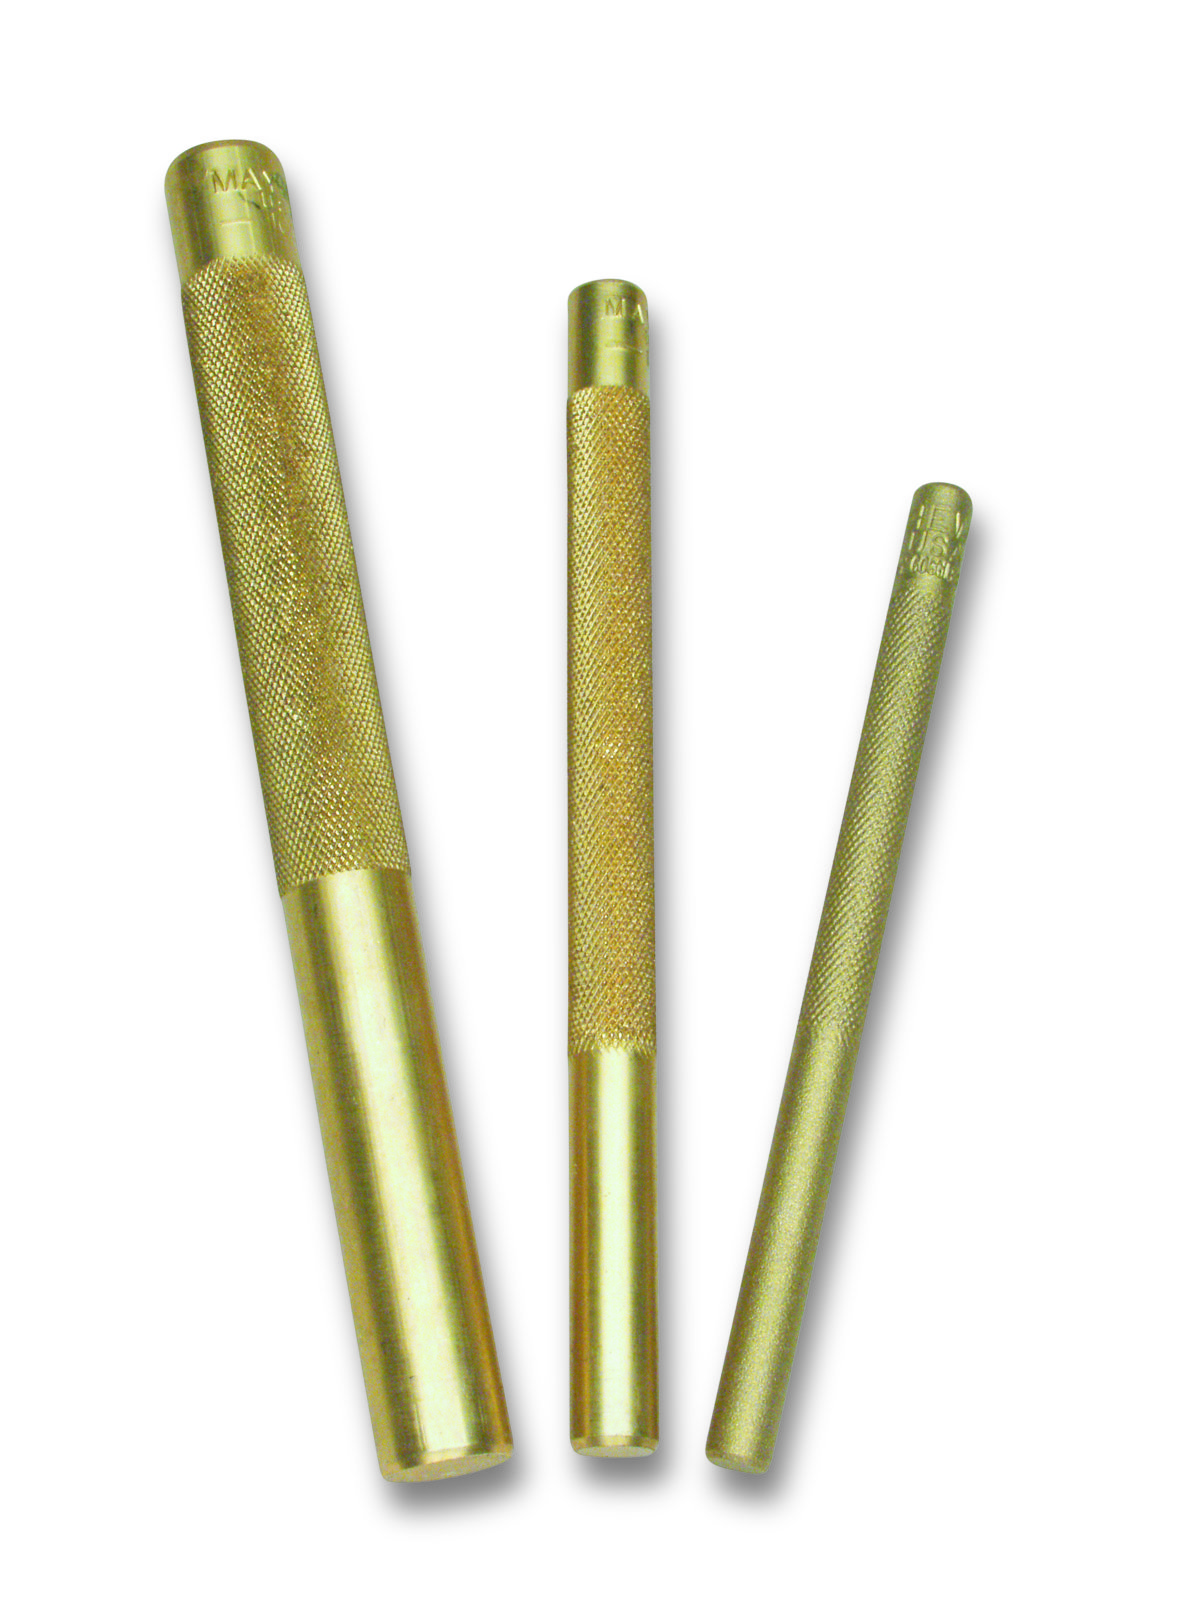 Knurled Brass 3-Piece Drift Punch Set w/Tray (Mayhew #61360) - 3/8 - 3/4  - Made in USA Tools